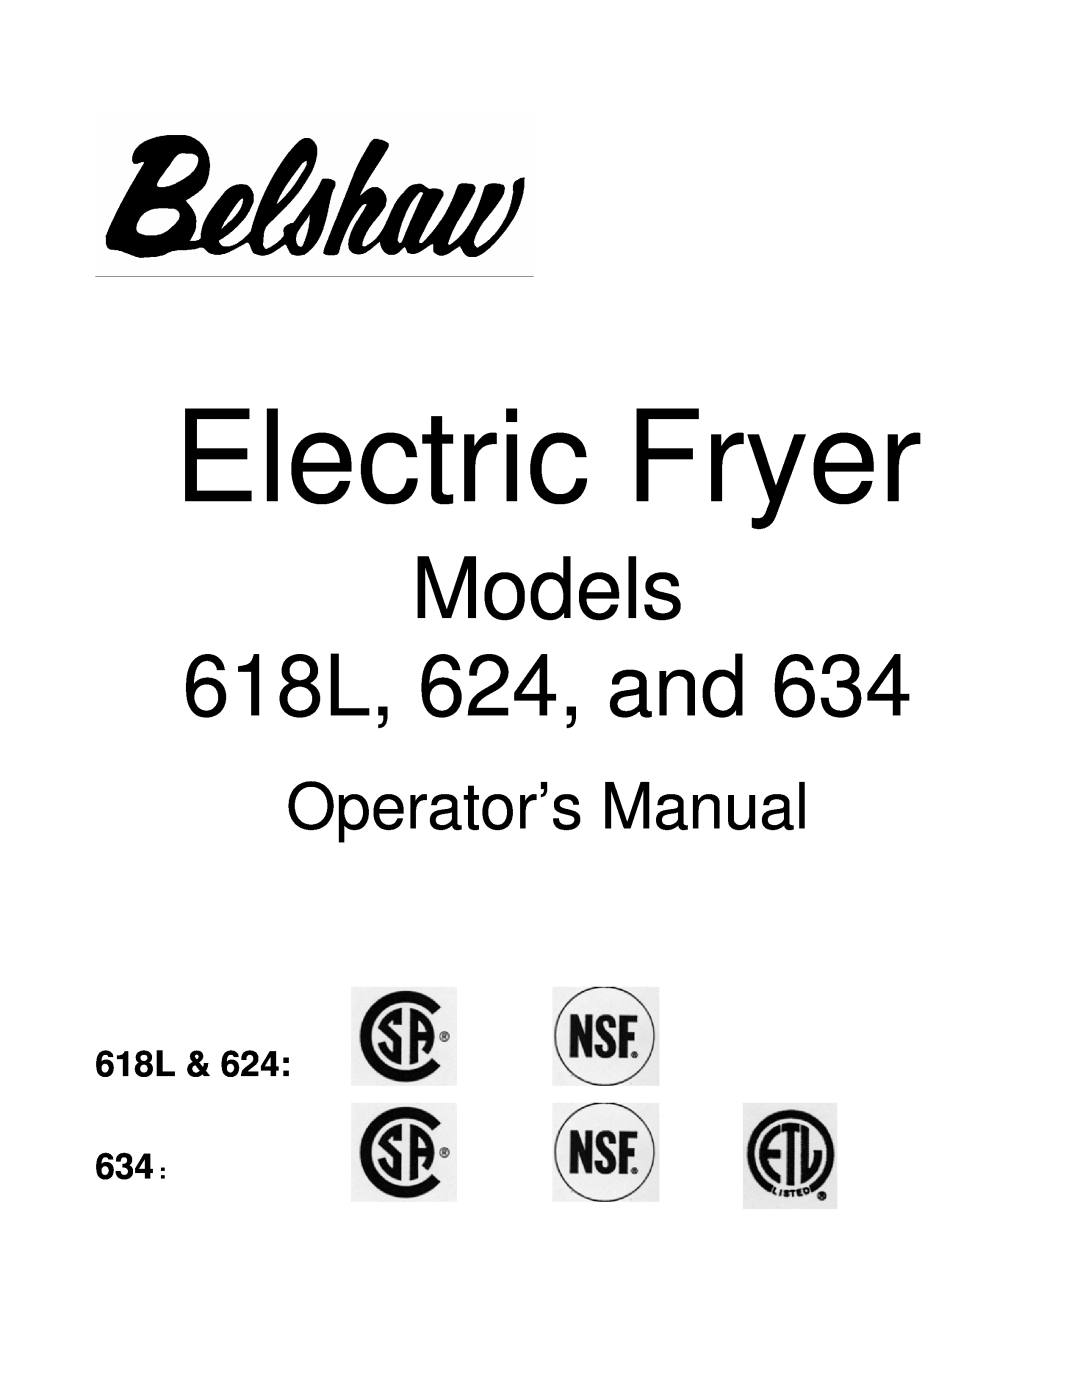 Belshaw Brothers manual Operator’s Manual, Electric Fryer, Models 618L, 624, and, 618L 634 